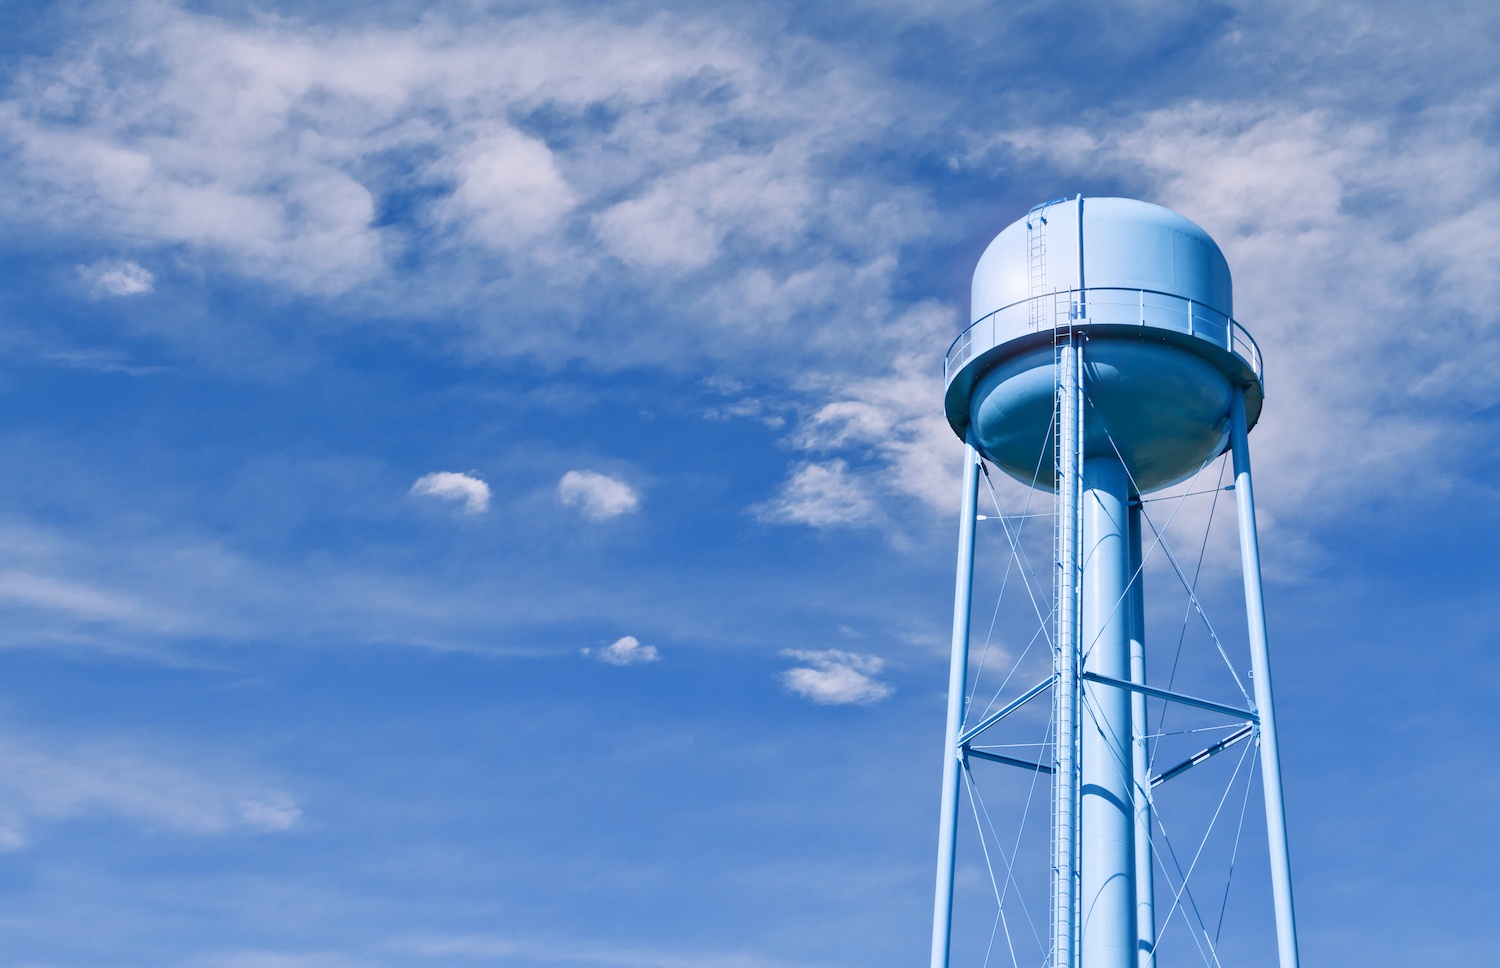 A city water tower set against a blue sky. March 2021